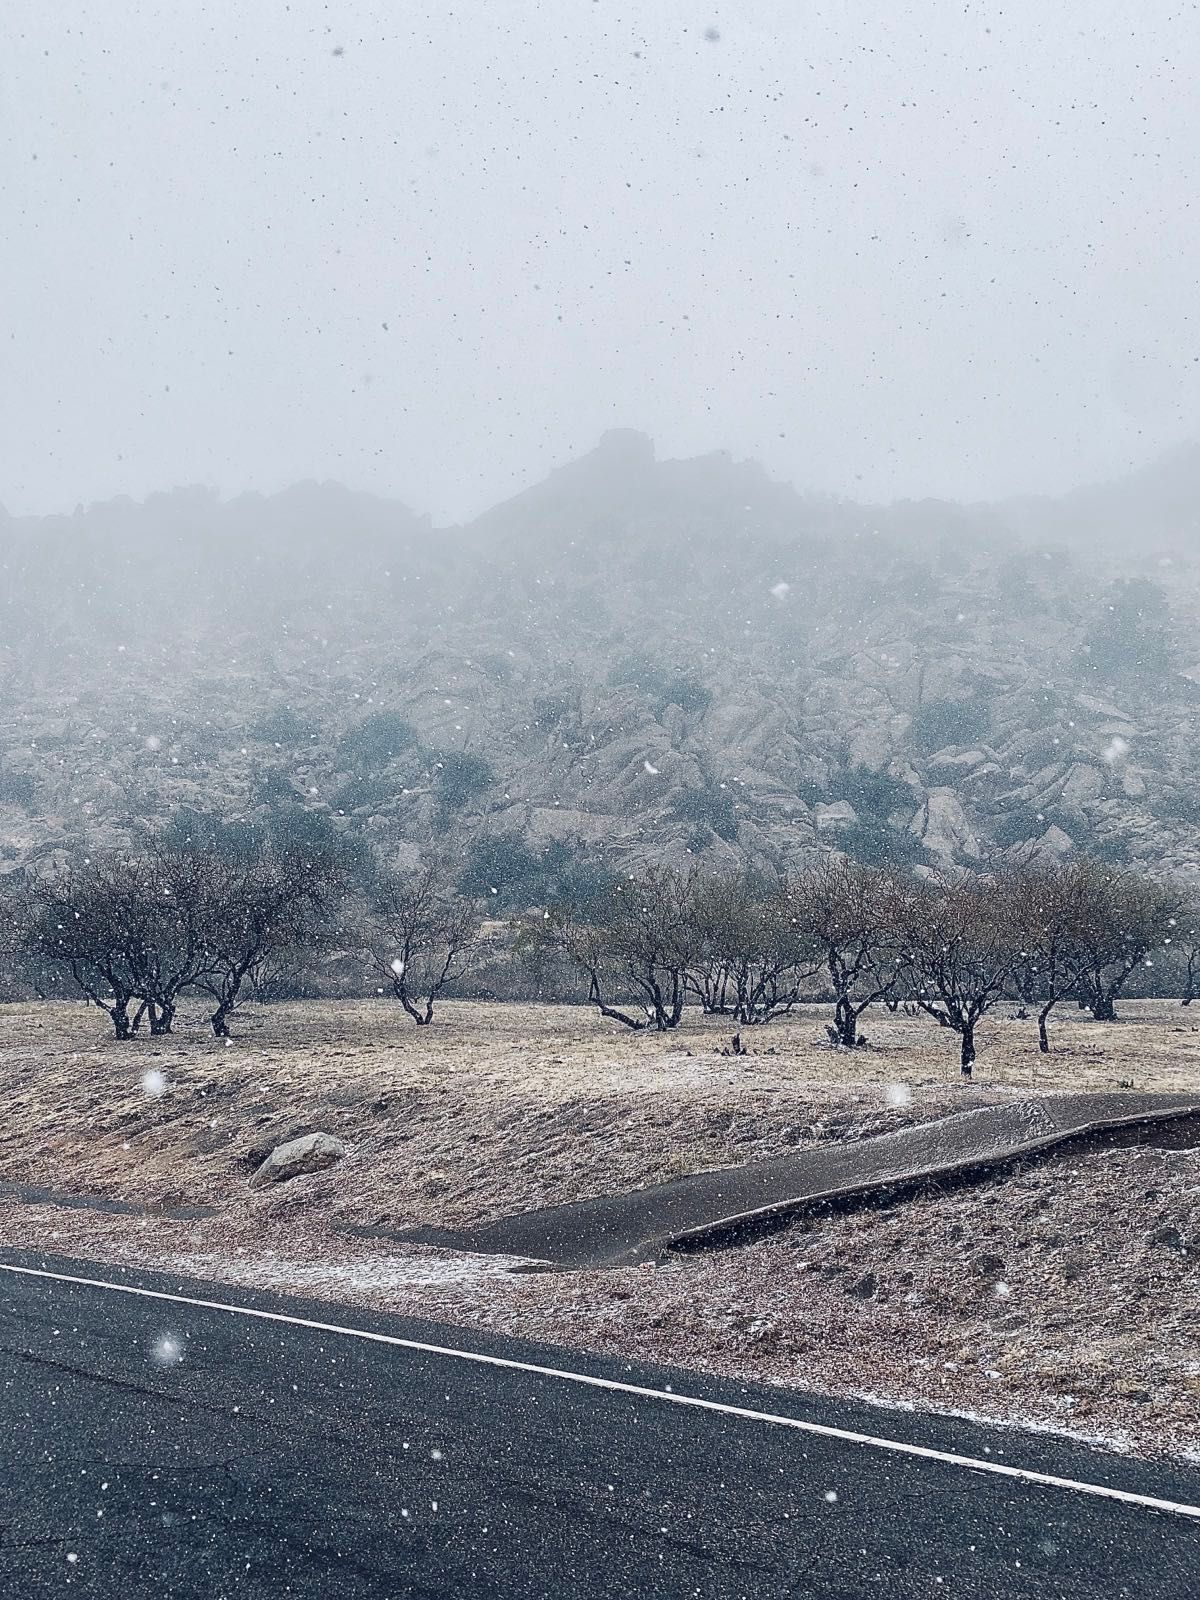 snowstorm on texas canyon arizona. forgot how beautiful they can be.